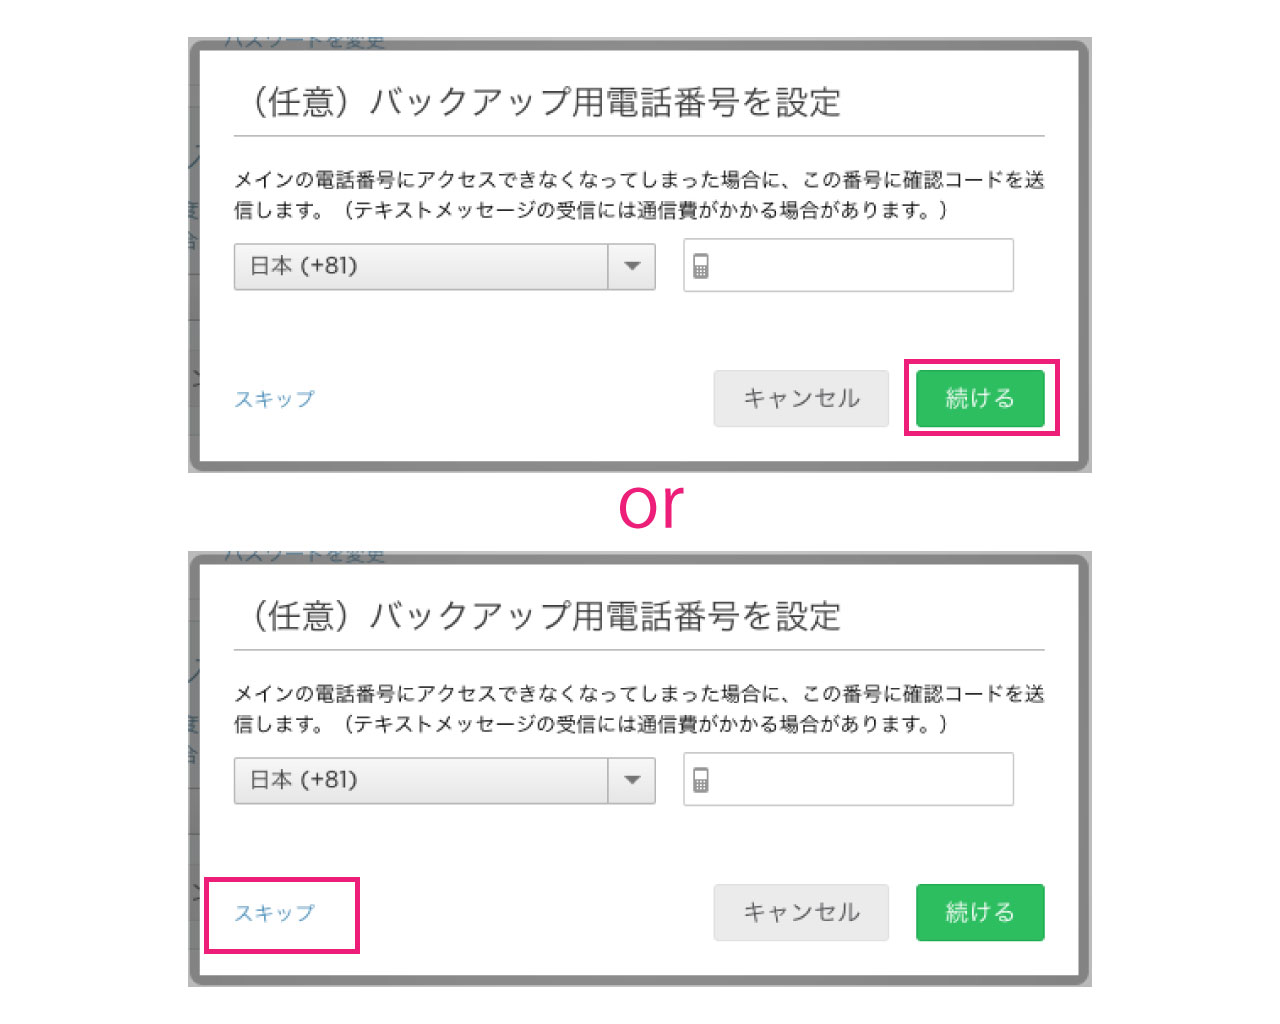 evernote-2step-authentication-4